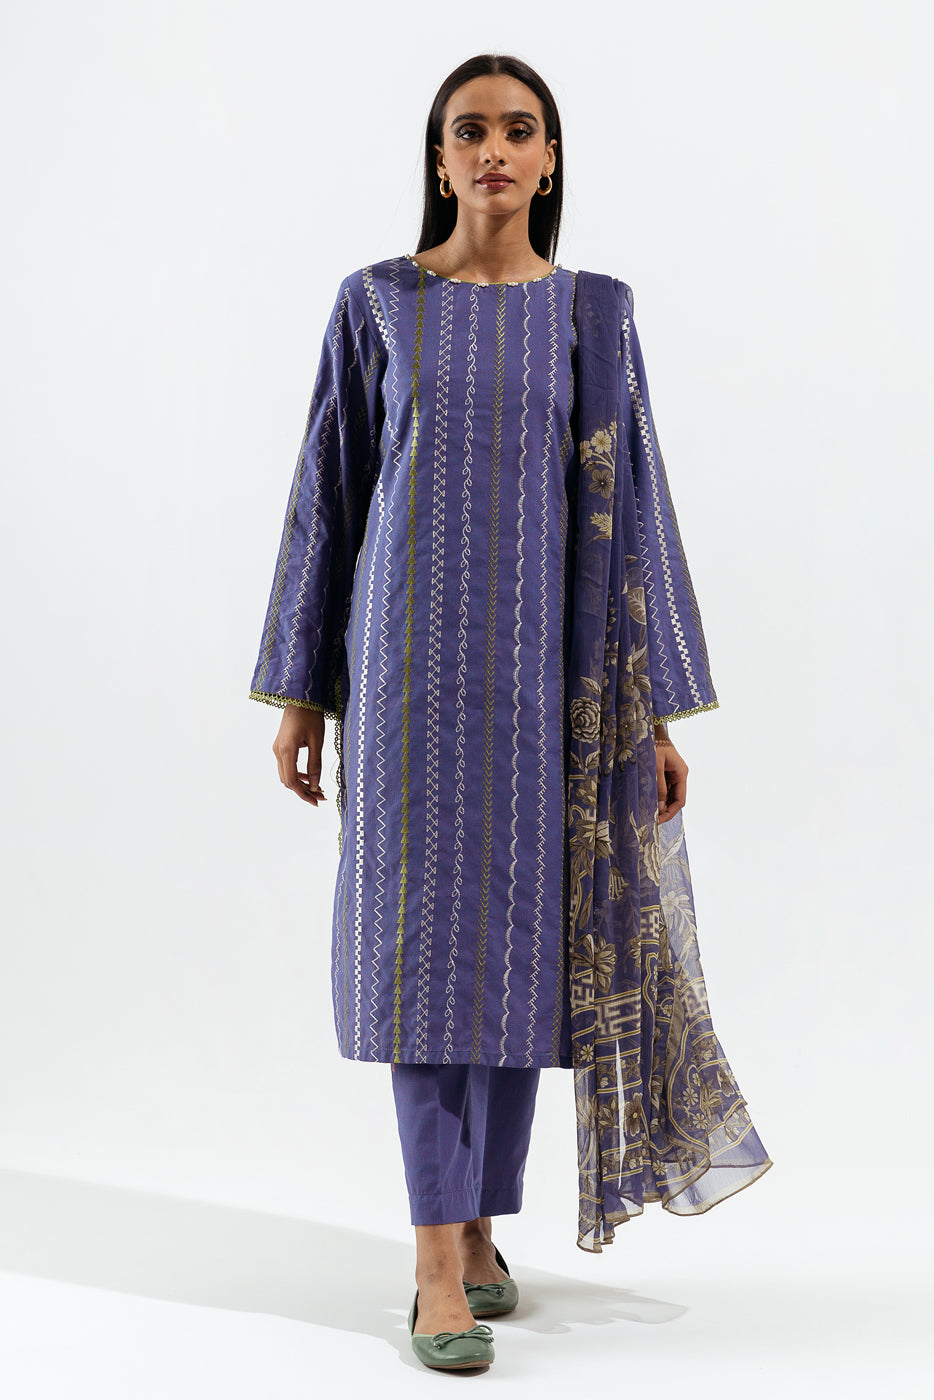 3 PIECE - EMBROIDERED TWO TONE SUIT - VIVID VIOLET